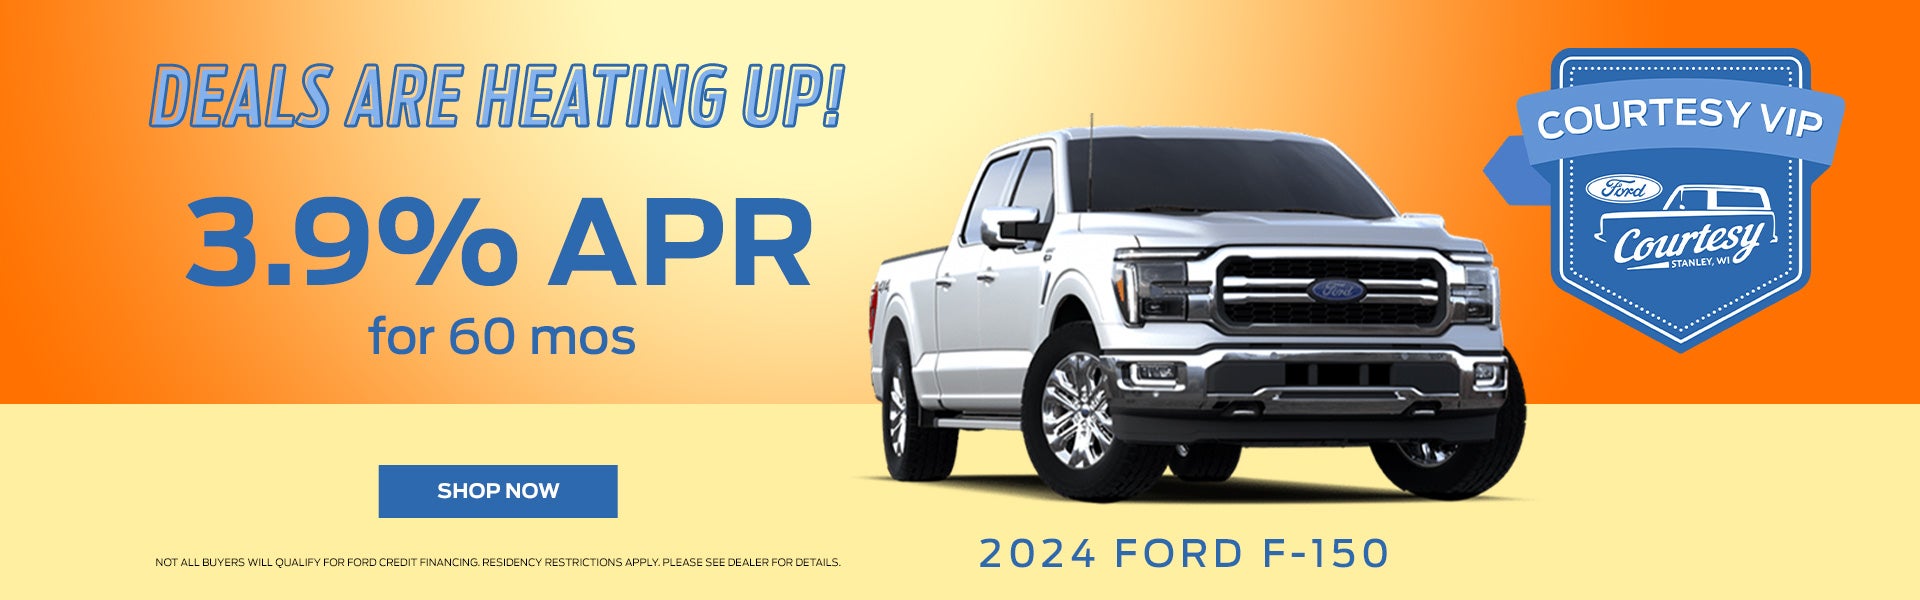 2024 F-150 3.9% APR for 60 mos